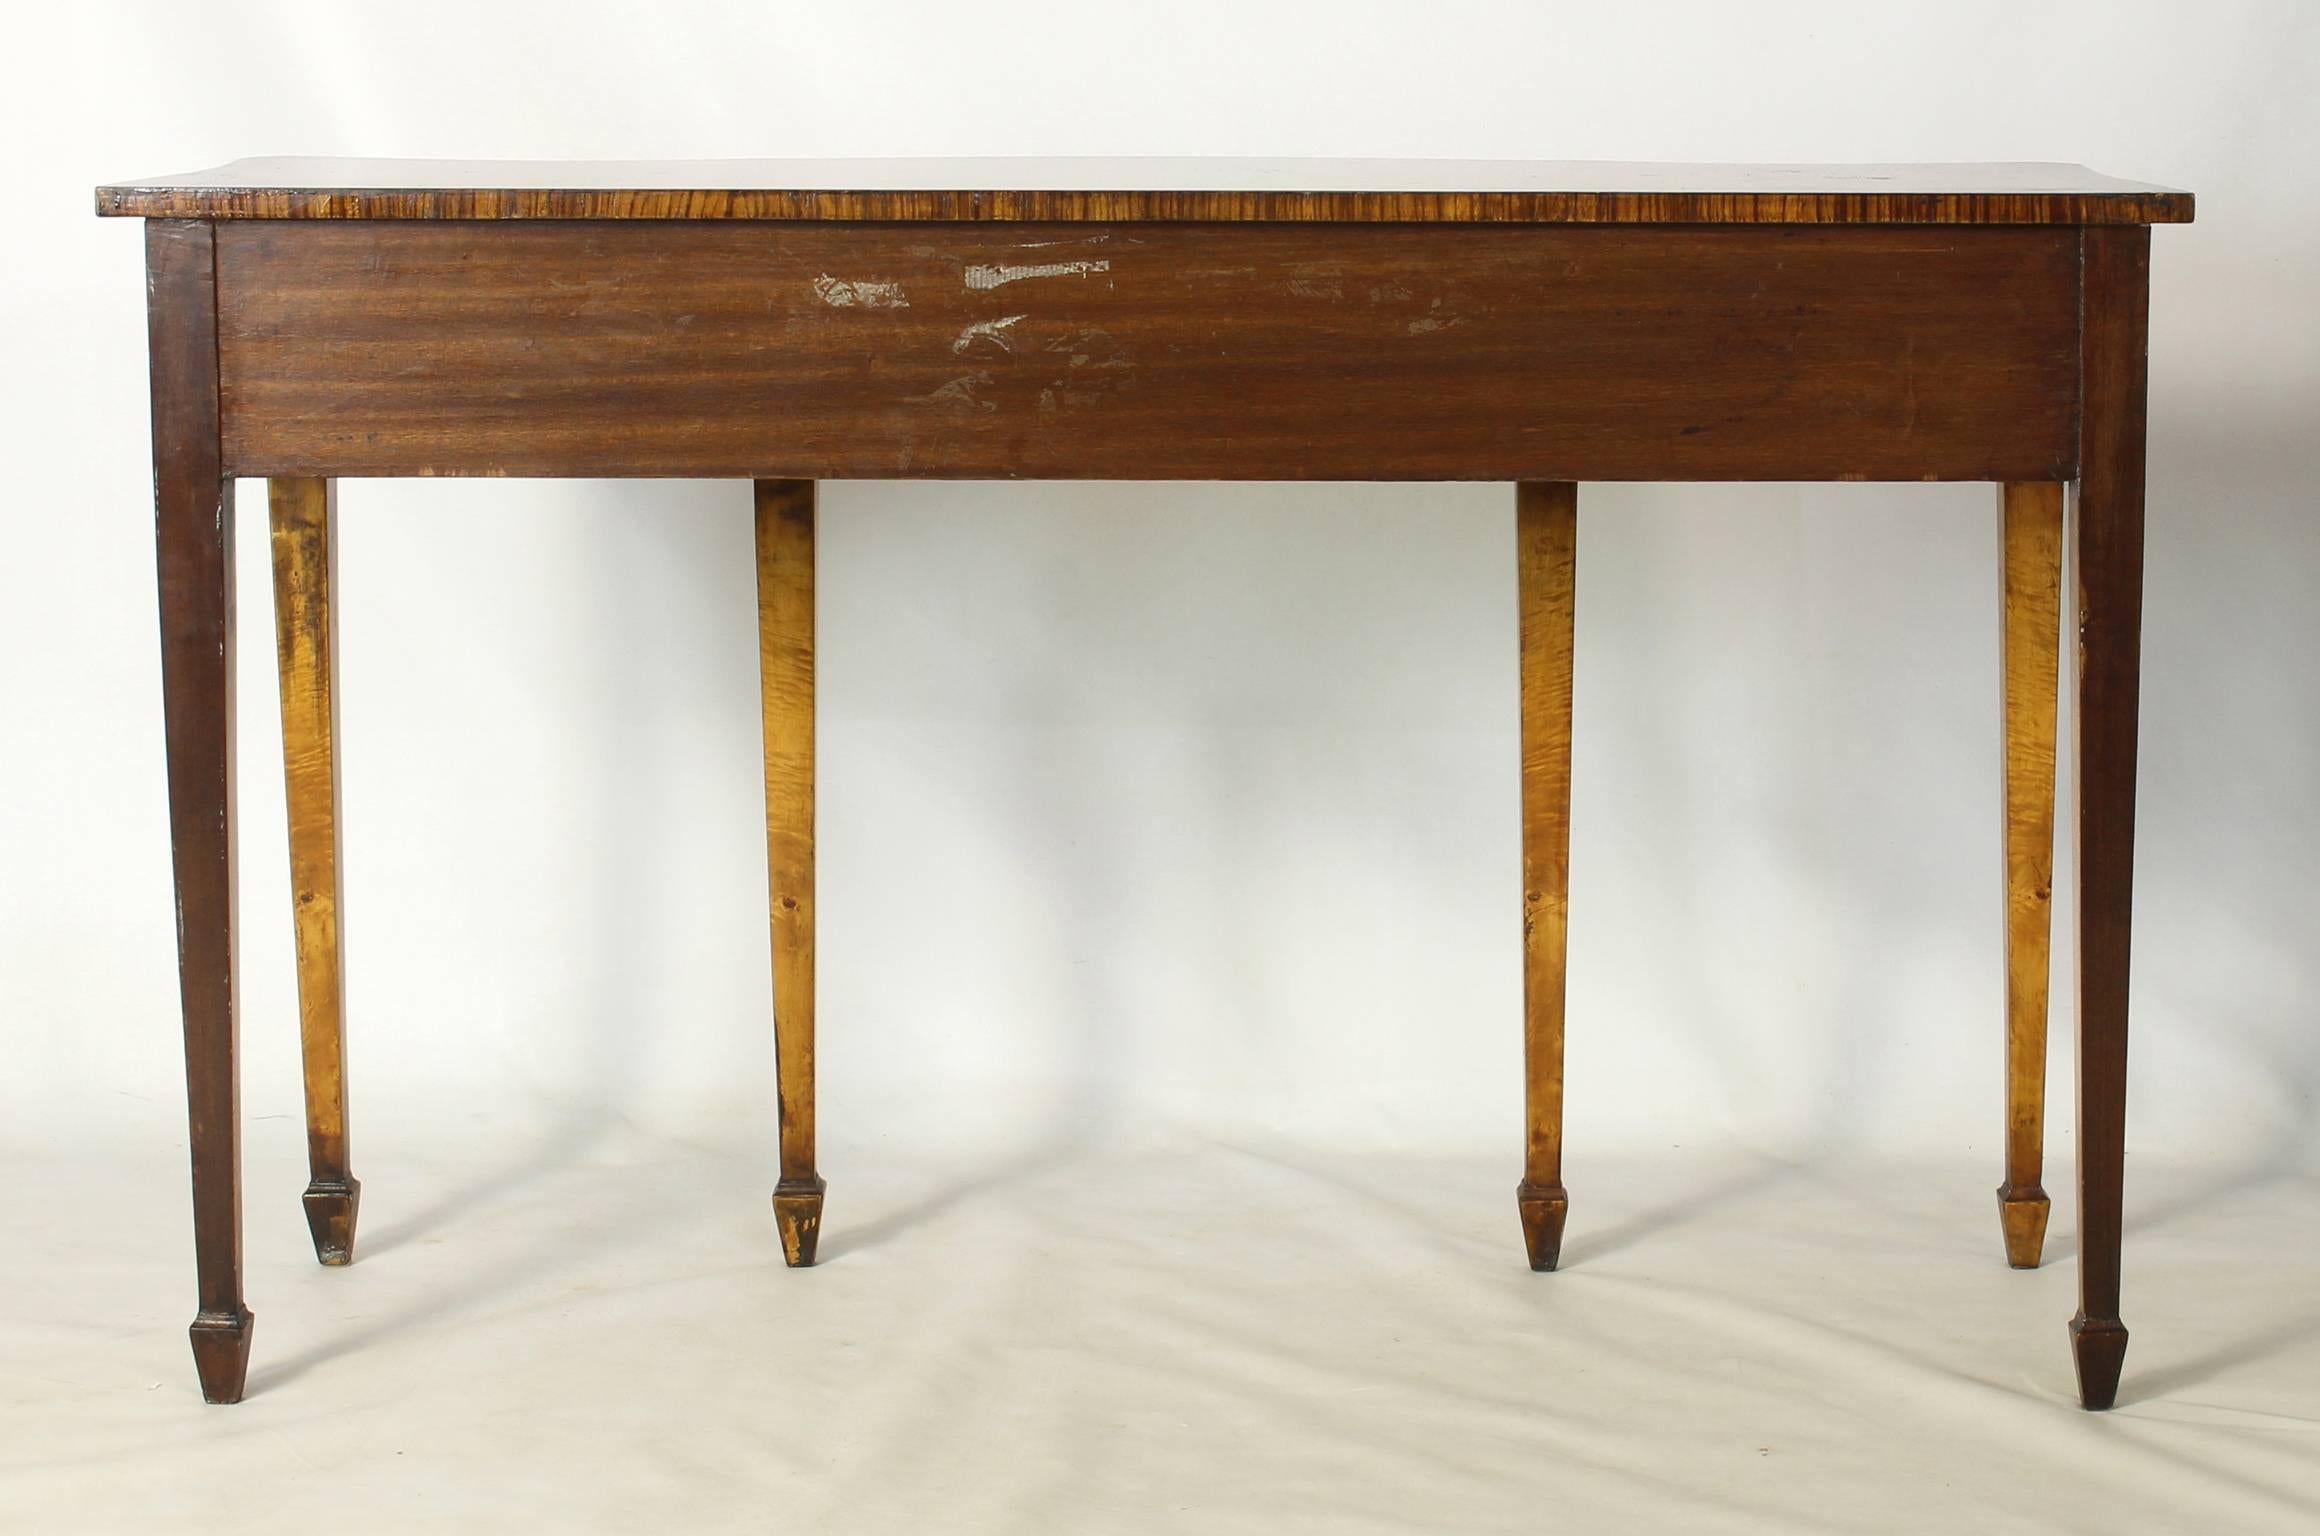 Great Britain (UK) Geo. III Style Serpentine Console Table For Sale